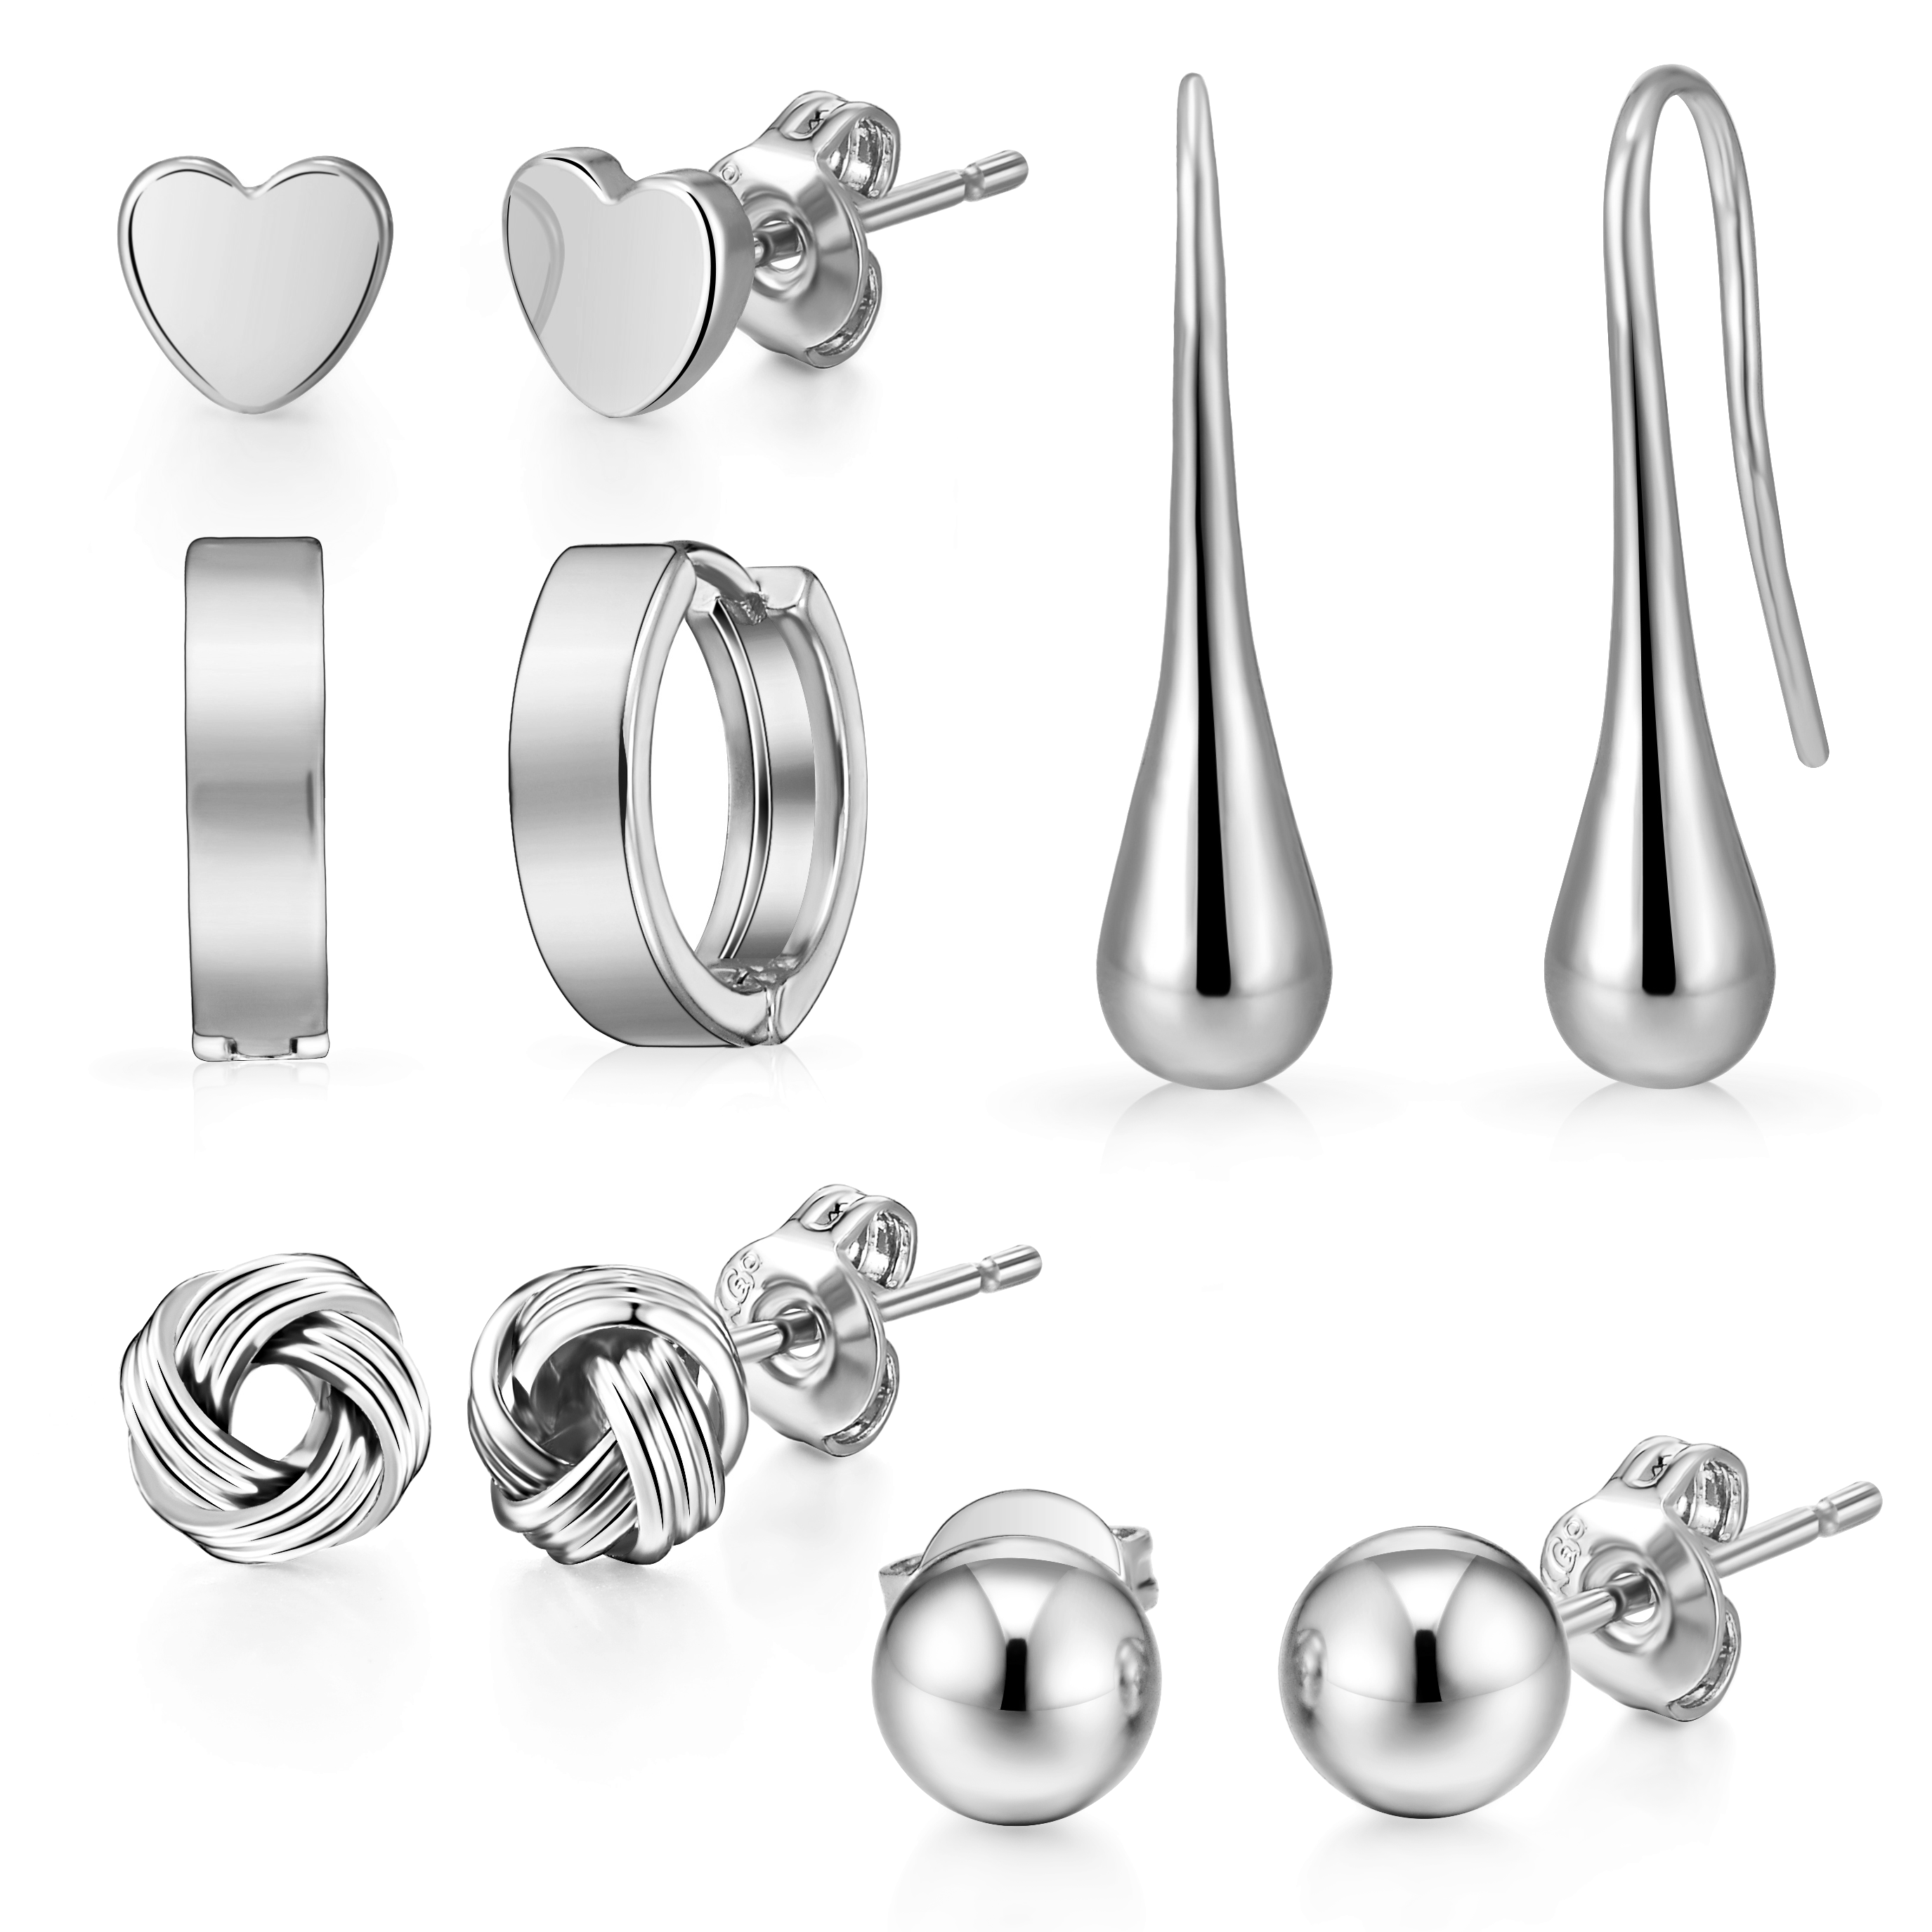 5 Pairs of Silver Plated Earrings